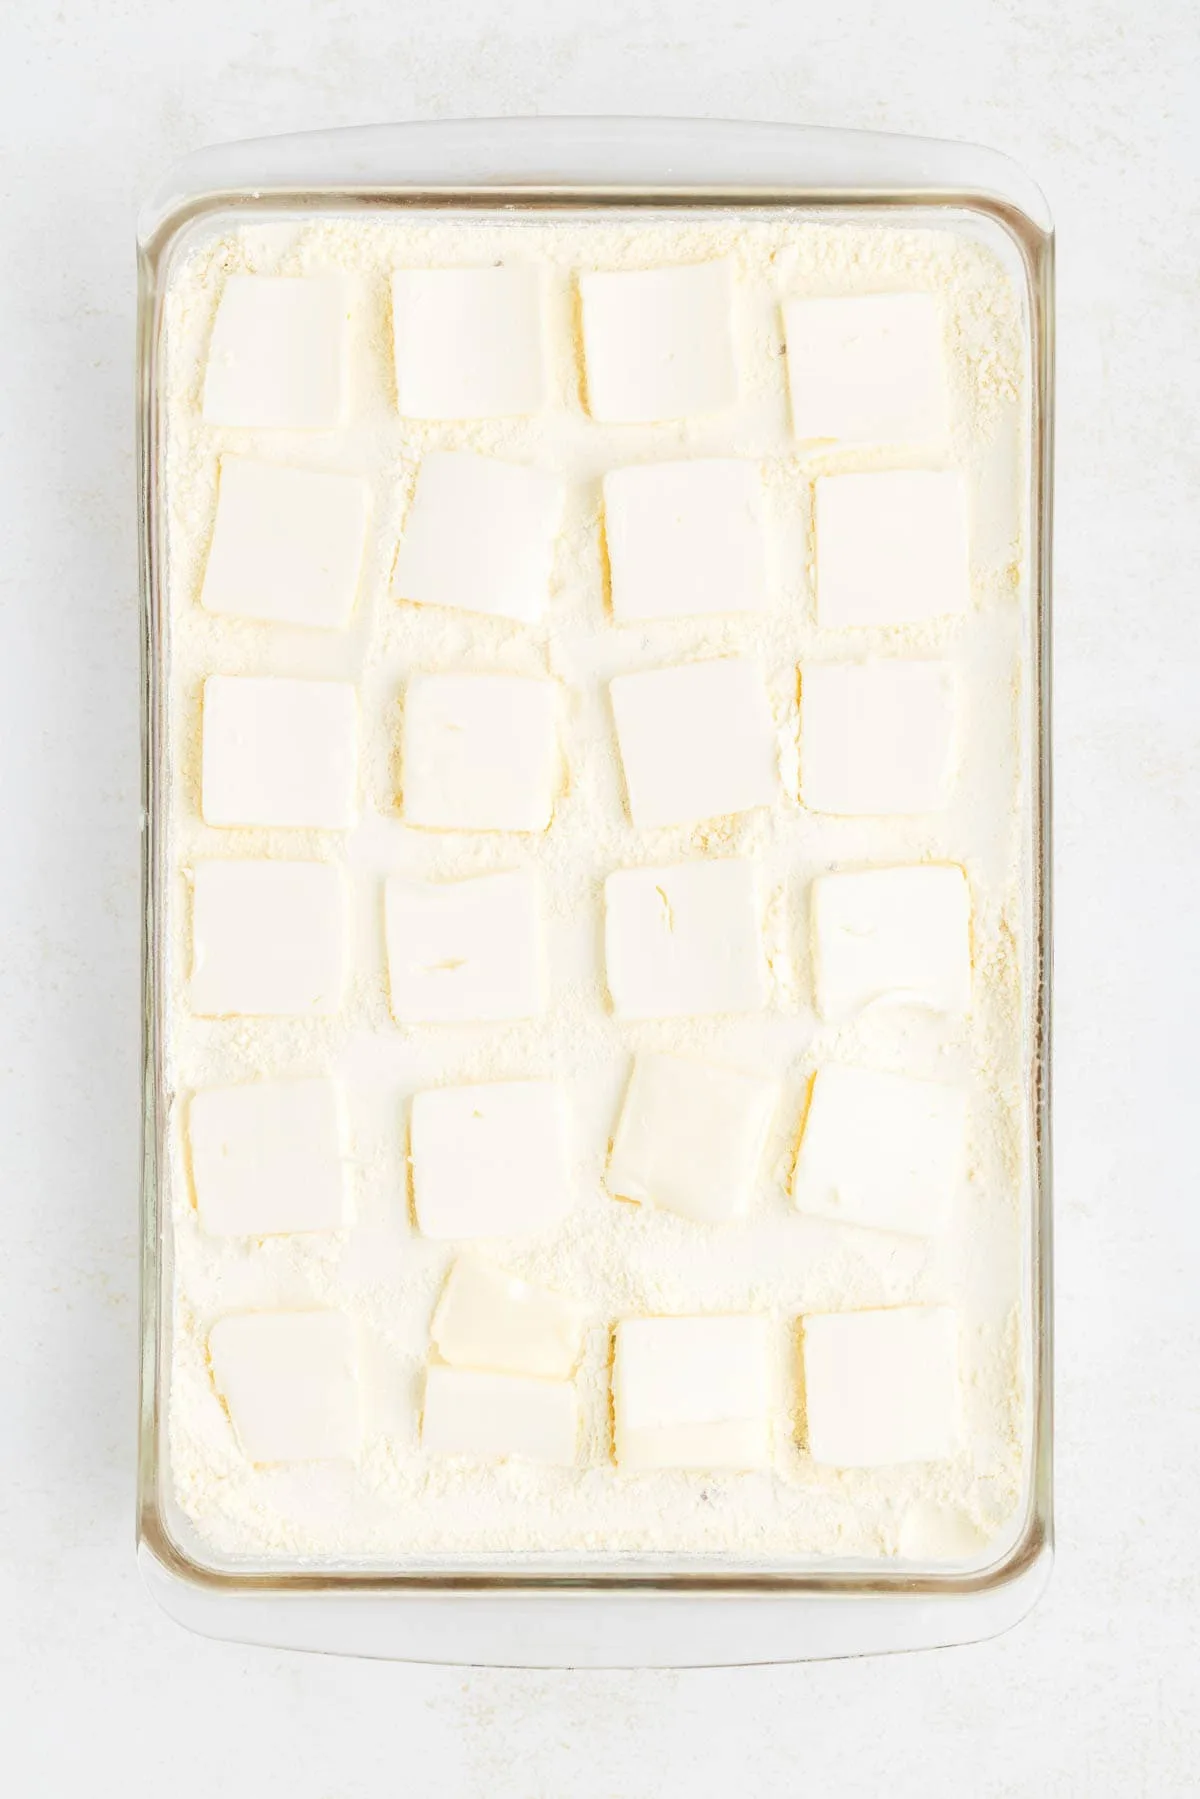 butter squares on top of dry cake mix in a baking dish